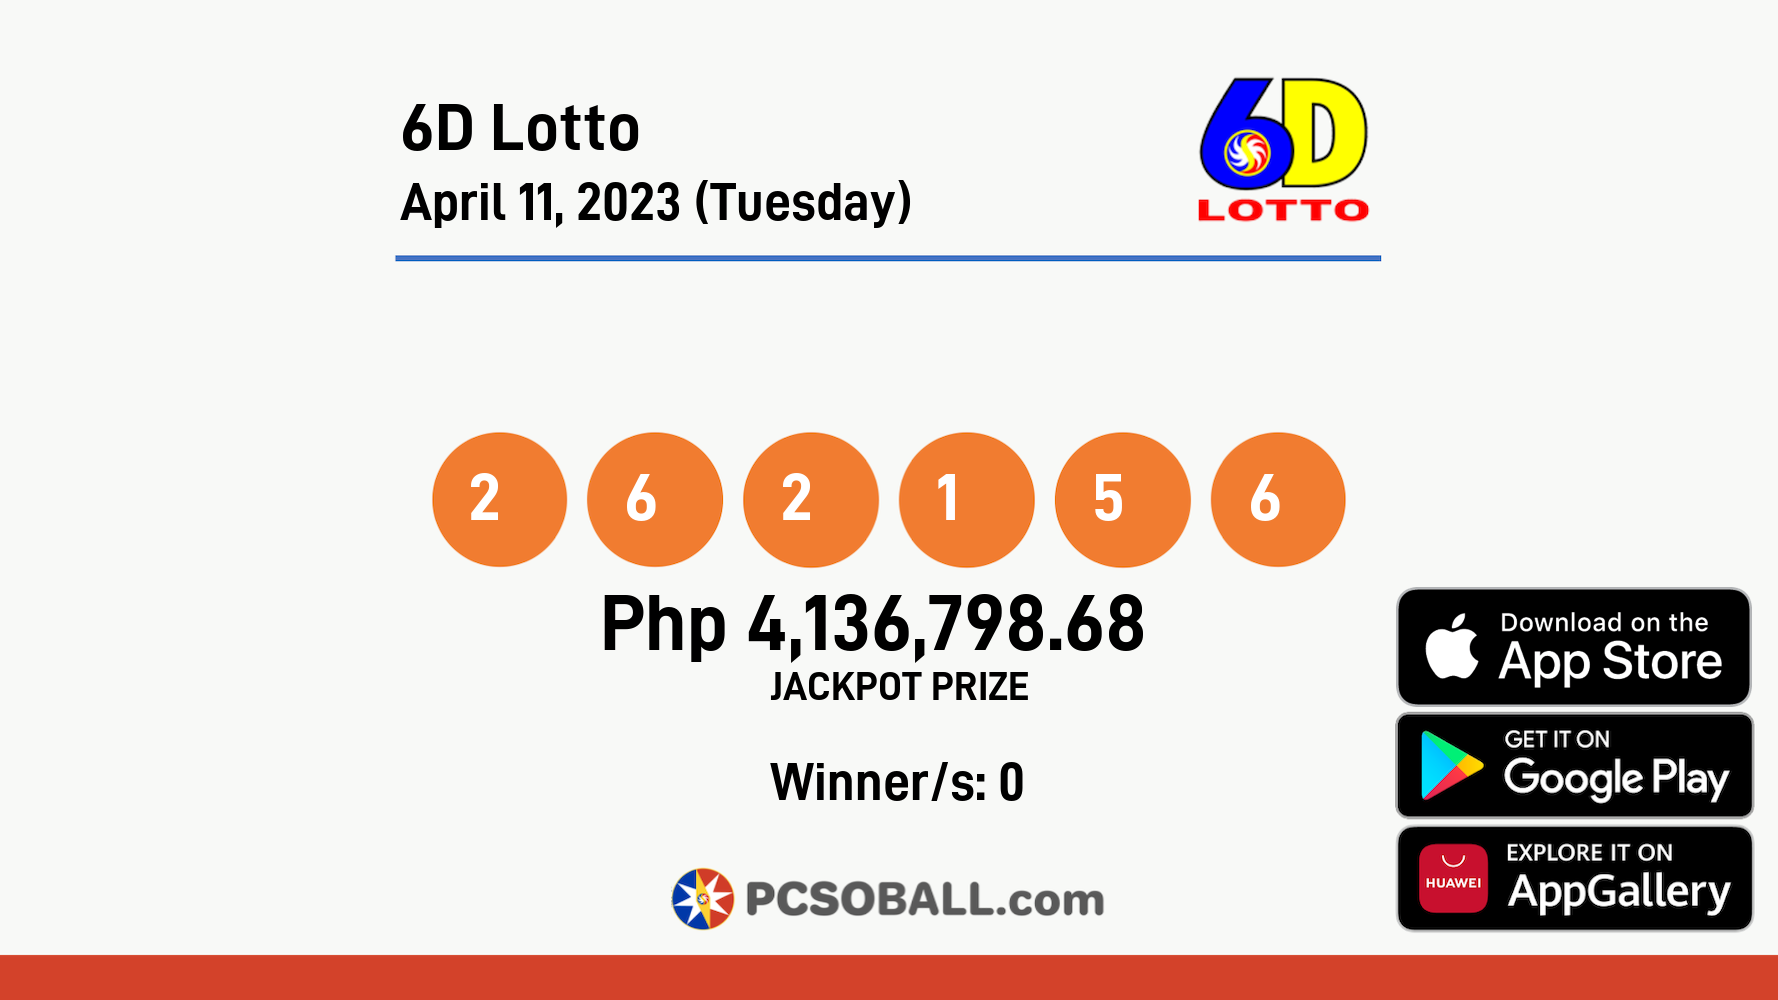 6D Lotto April 11, 2023 (Tuesday) Result